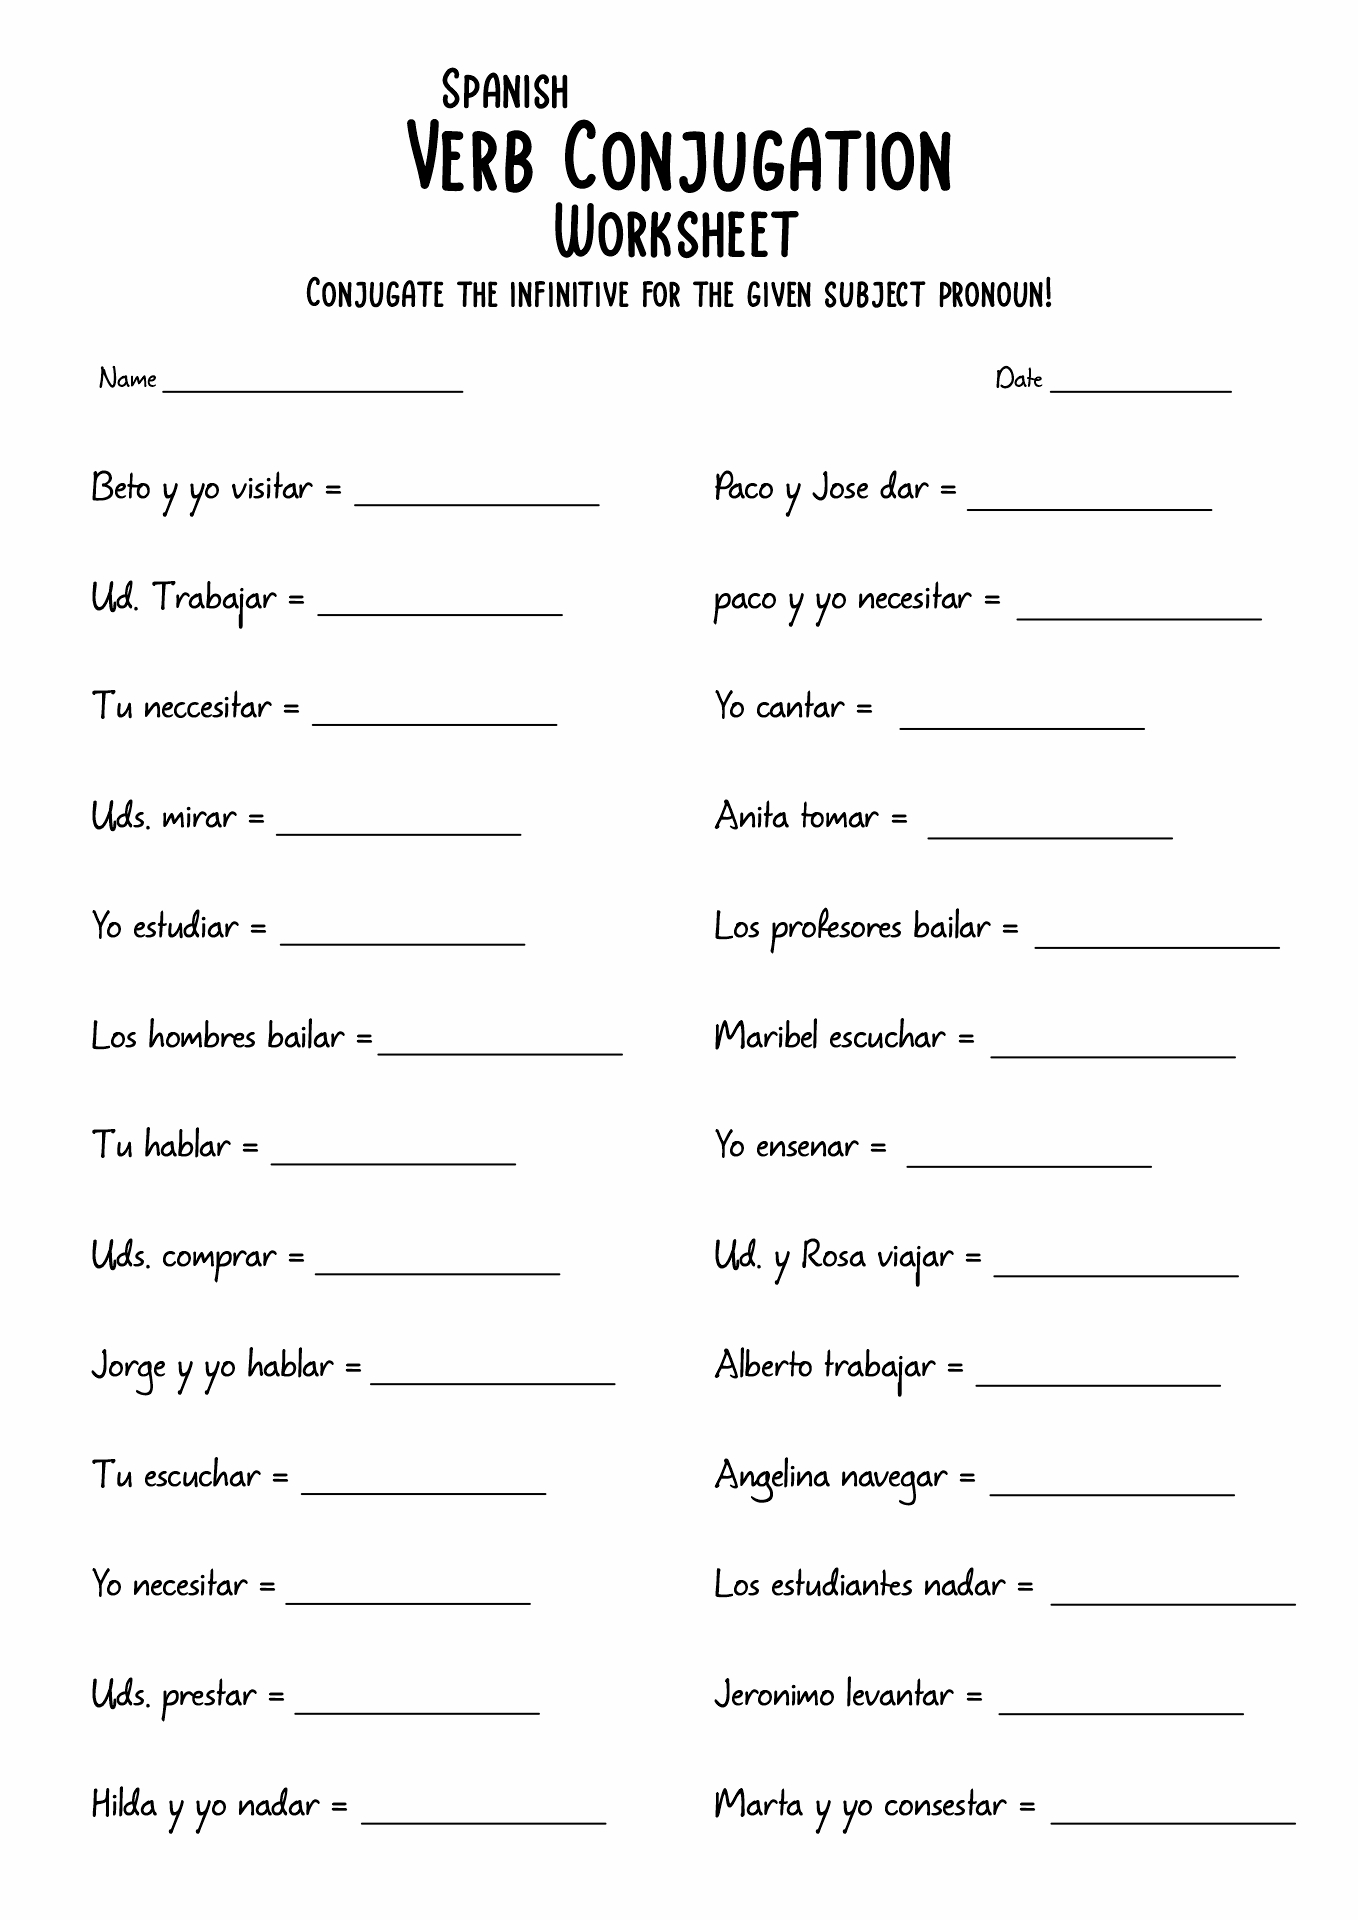 18-best-images-of-spanish-verb-worksheets-spanish-verb-conjugation-worksheets-blank-spanish